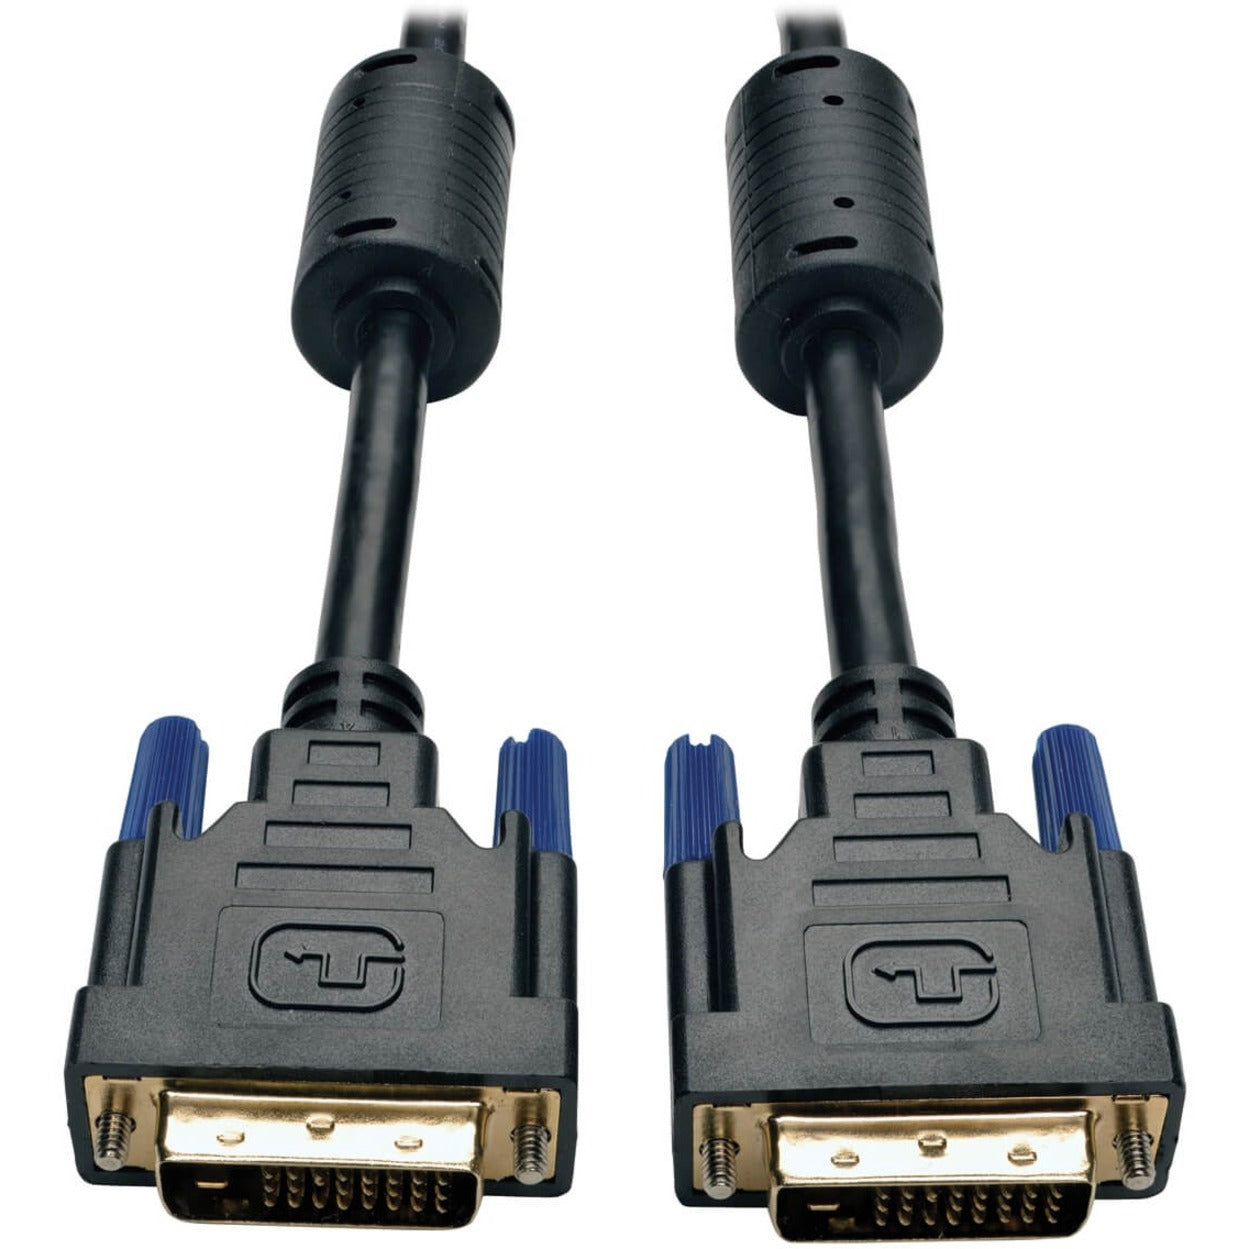 Tripp Lite P560-025 DVI-D Dual Link TMDS Cable, 25 ft, High Resolution Support